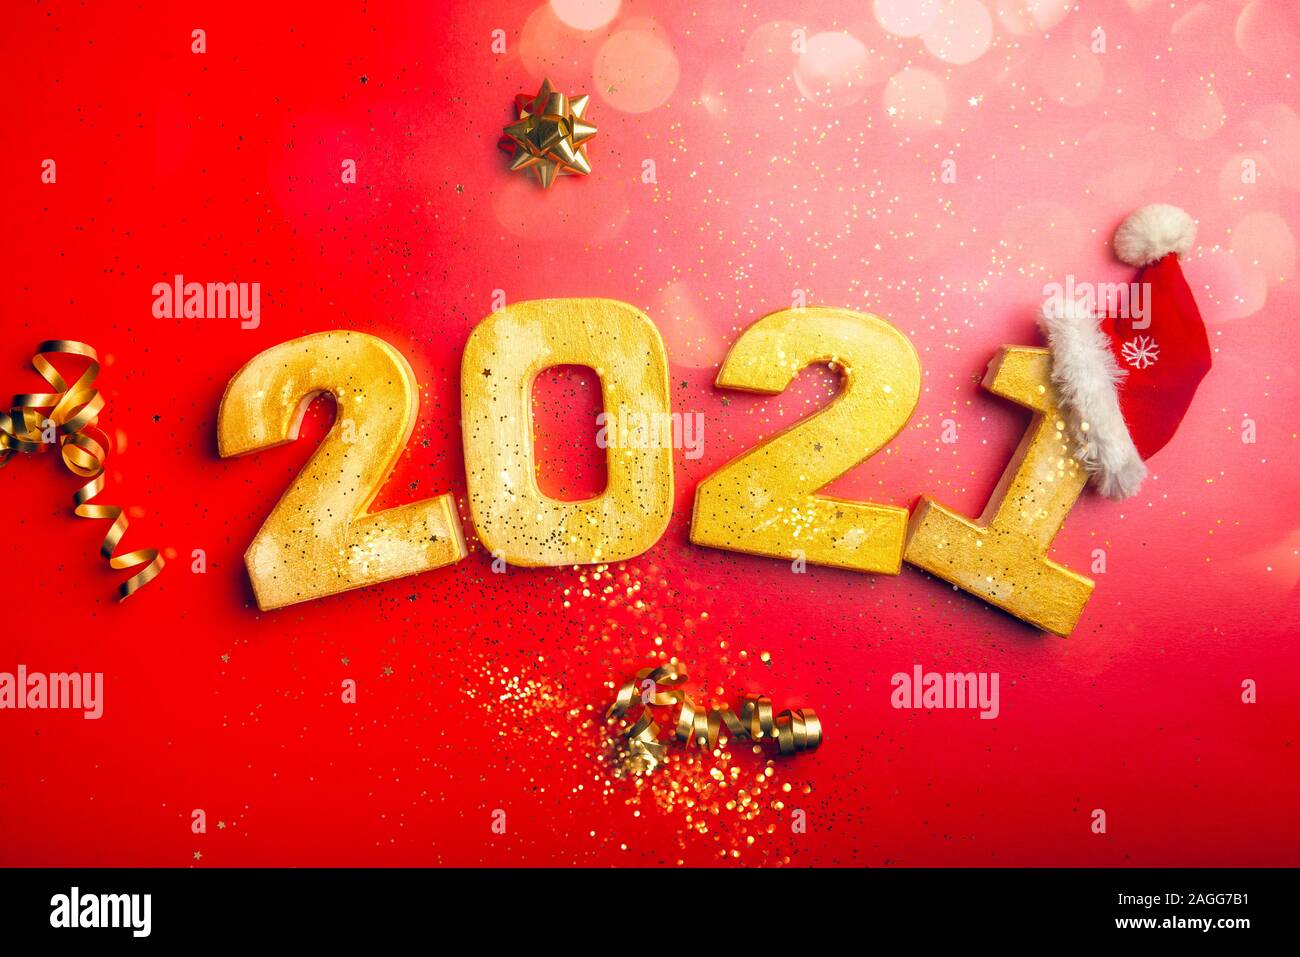 Happy New Year 2021. Golden digits 2021 with christmas hat are on red background with glitter. Holiday Party Decoration or postcard concept with top view and copy space. Stock Photo